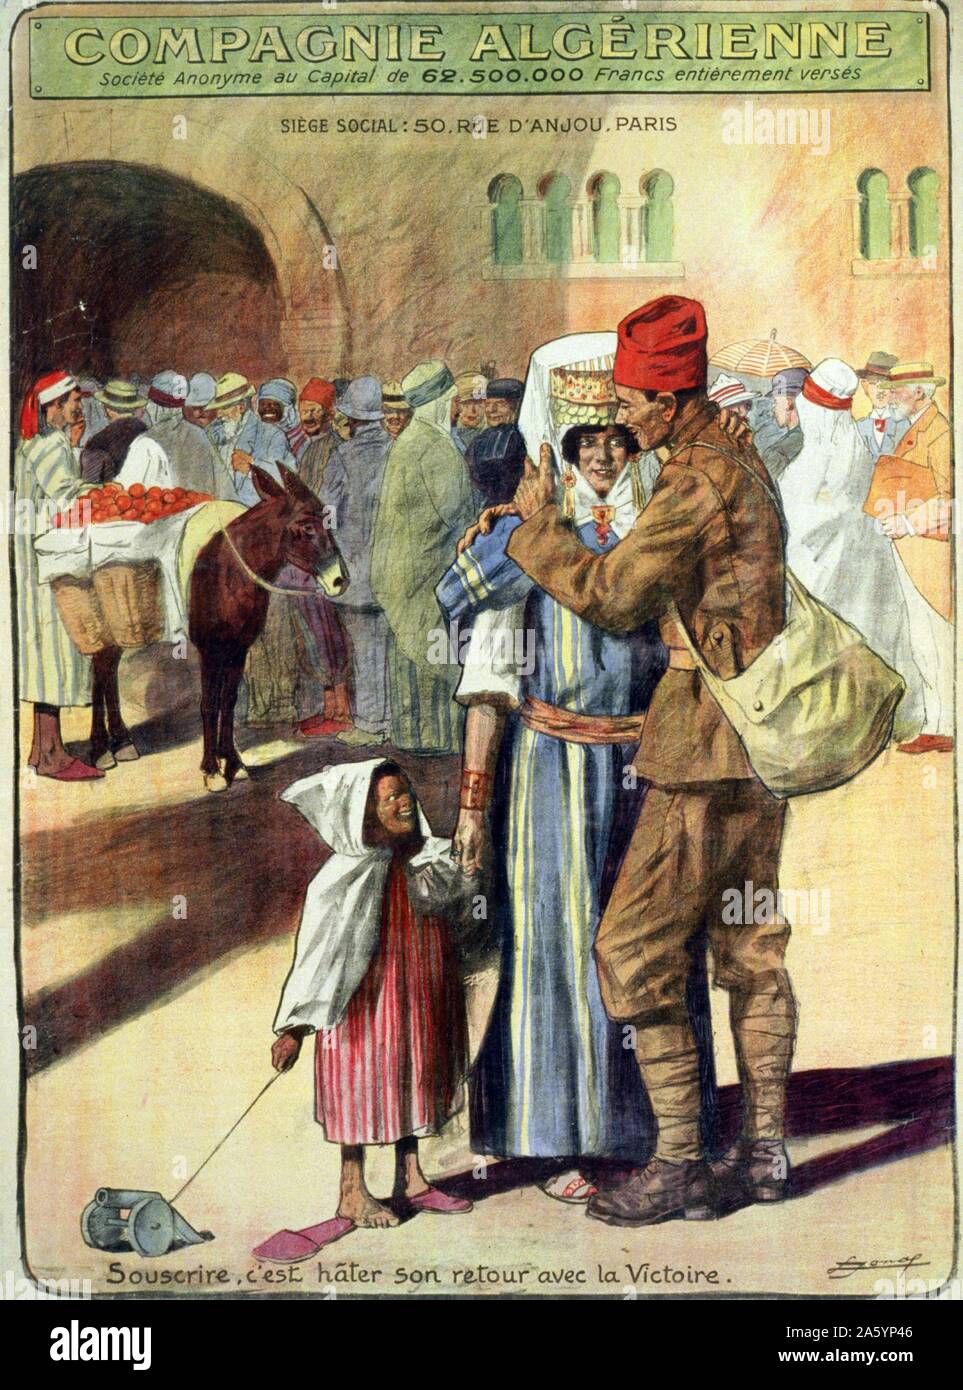 Compagnie Algérienne. Souscrire, c'est hâter son retour avec la victoire By Lucien Jonas, 1880-1947, French artist. Published 1918. An Algerian soldier back in Algeria with his wife and child. Translation of title: Compagnie Algérienne. To subscribe to the loan means victory, which will hasten his homecoming. Stock Photo